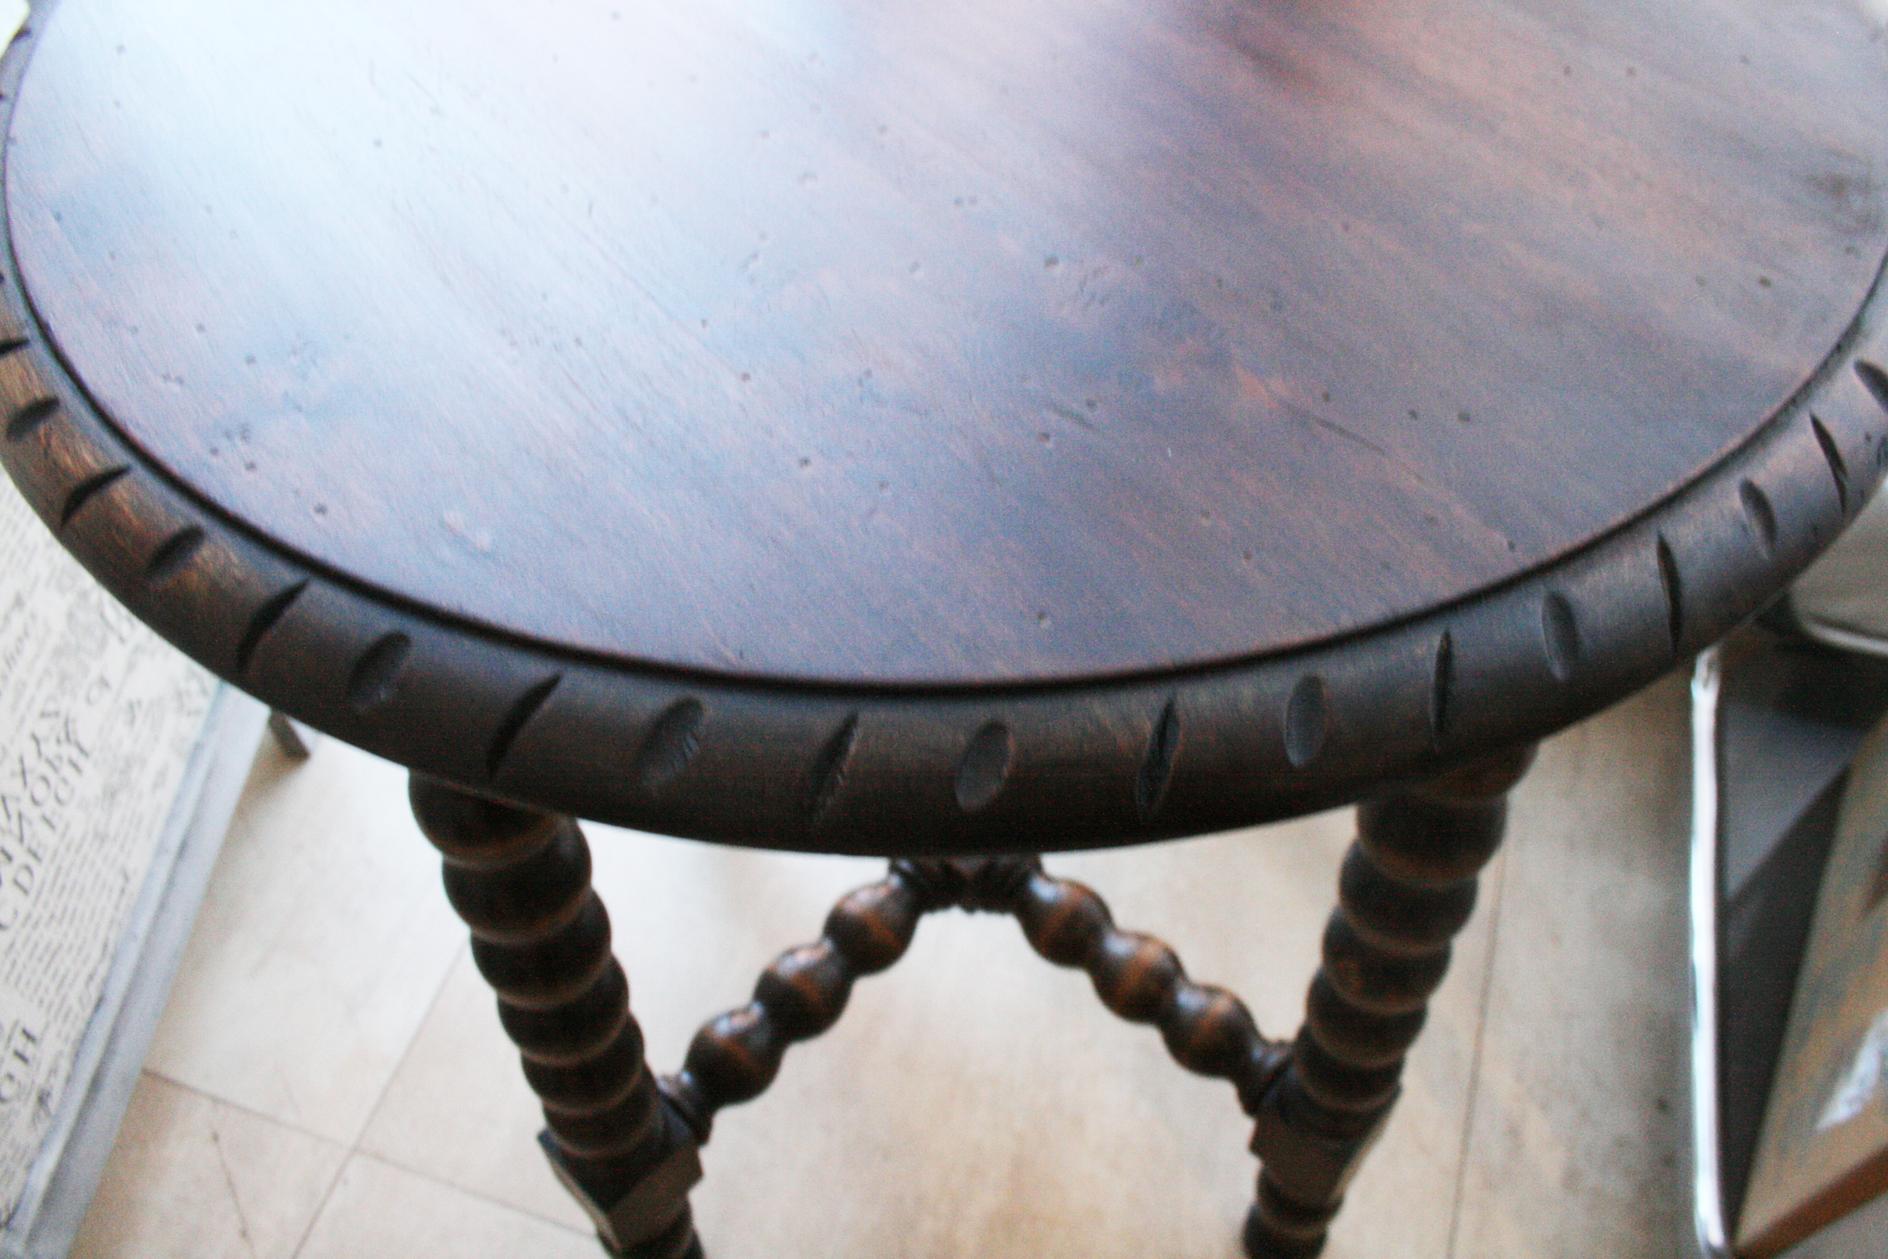 Victorian Antique Round Side Table from the 19th Century Wood with Turned Legs